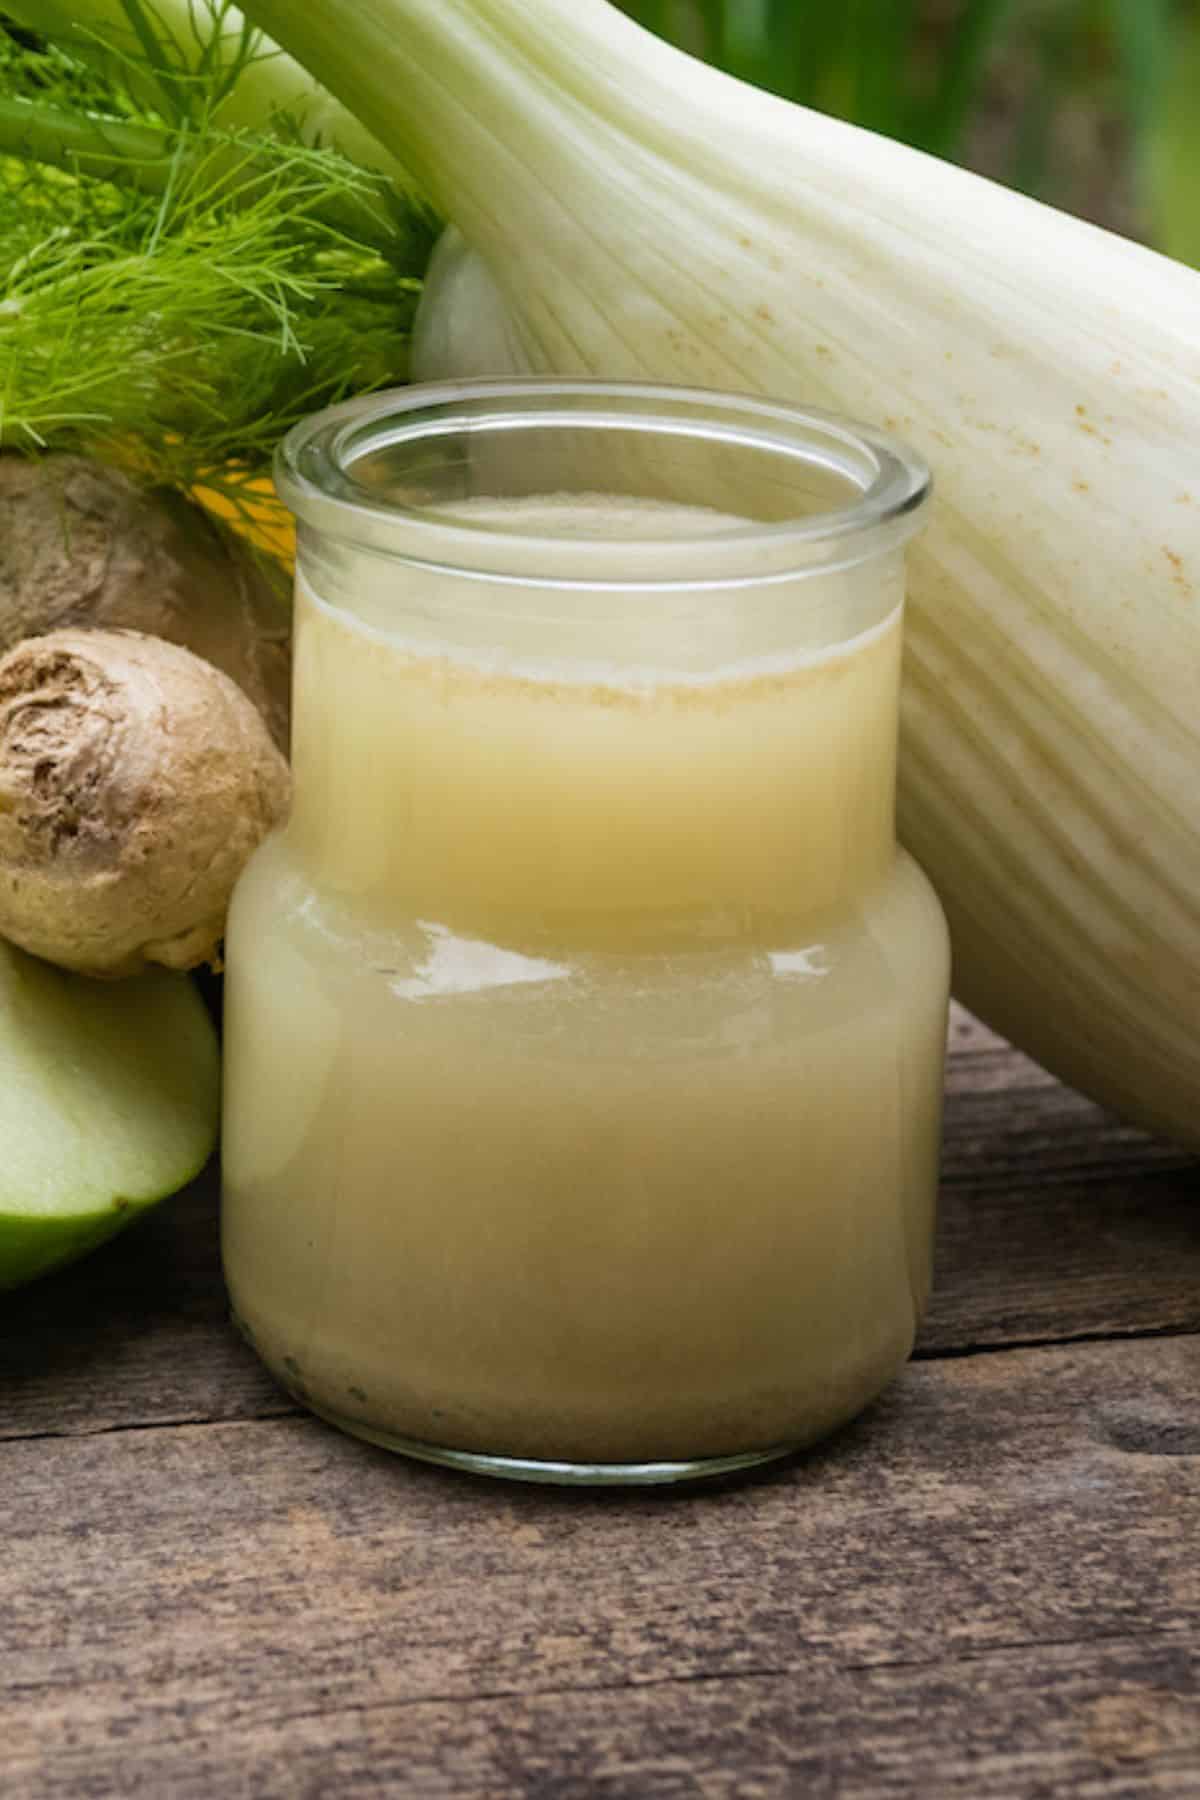 A glass of fennel juice next to fennel, apple, and ginger.